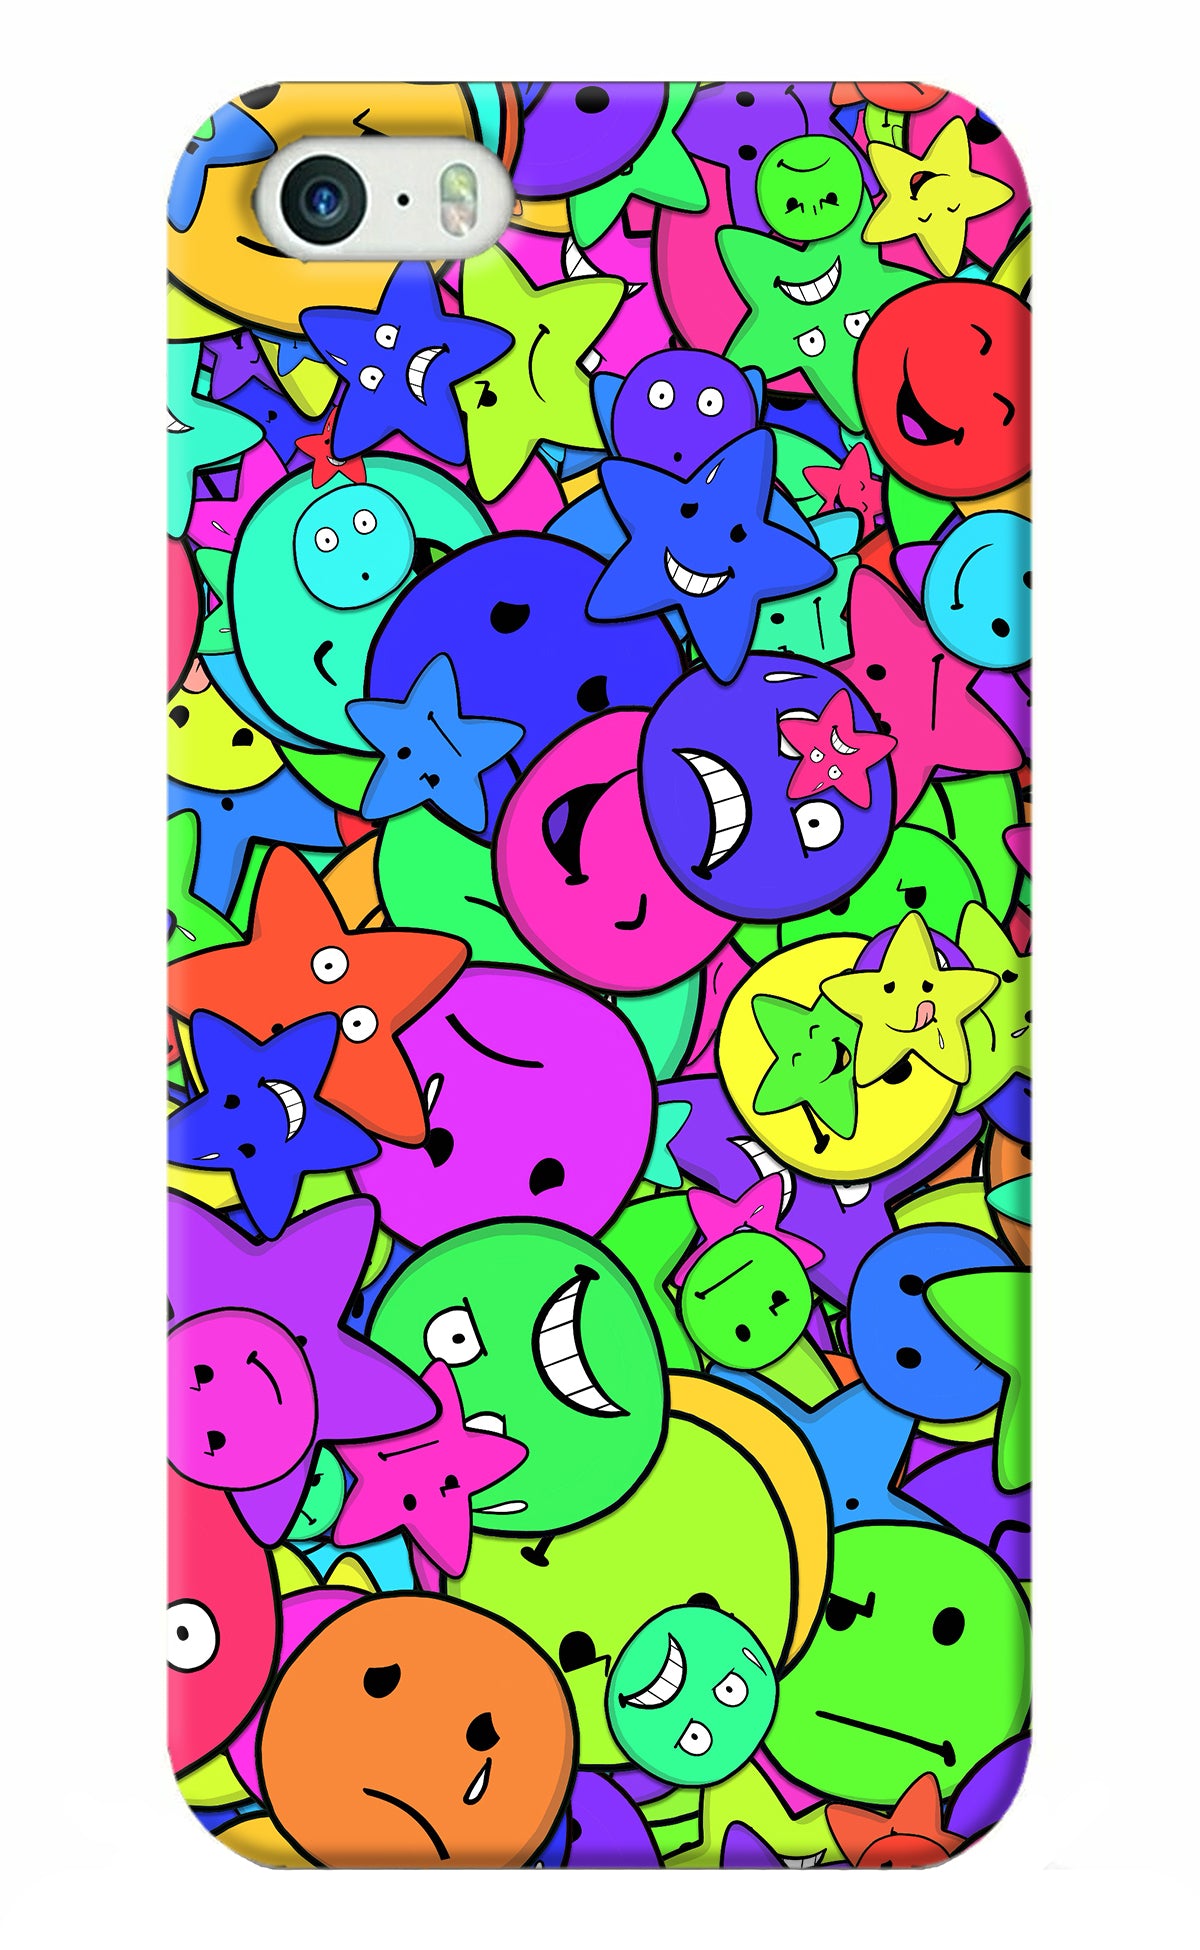 Fun Doodle iPhone 5/5s Back Cover